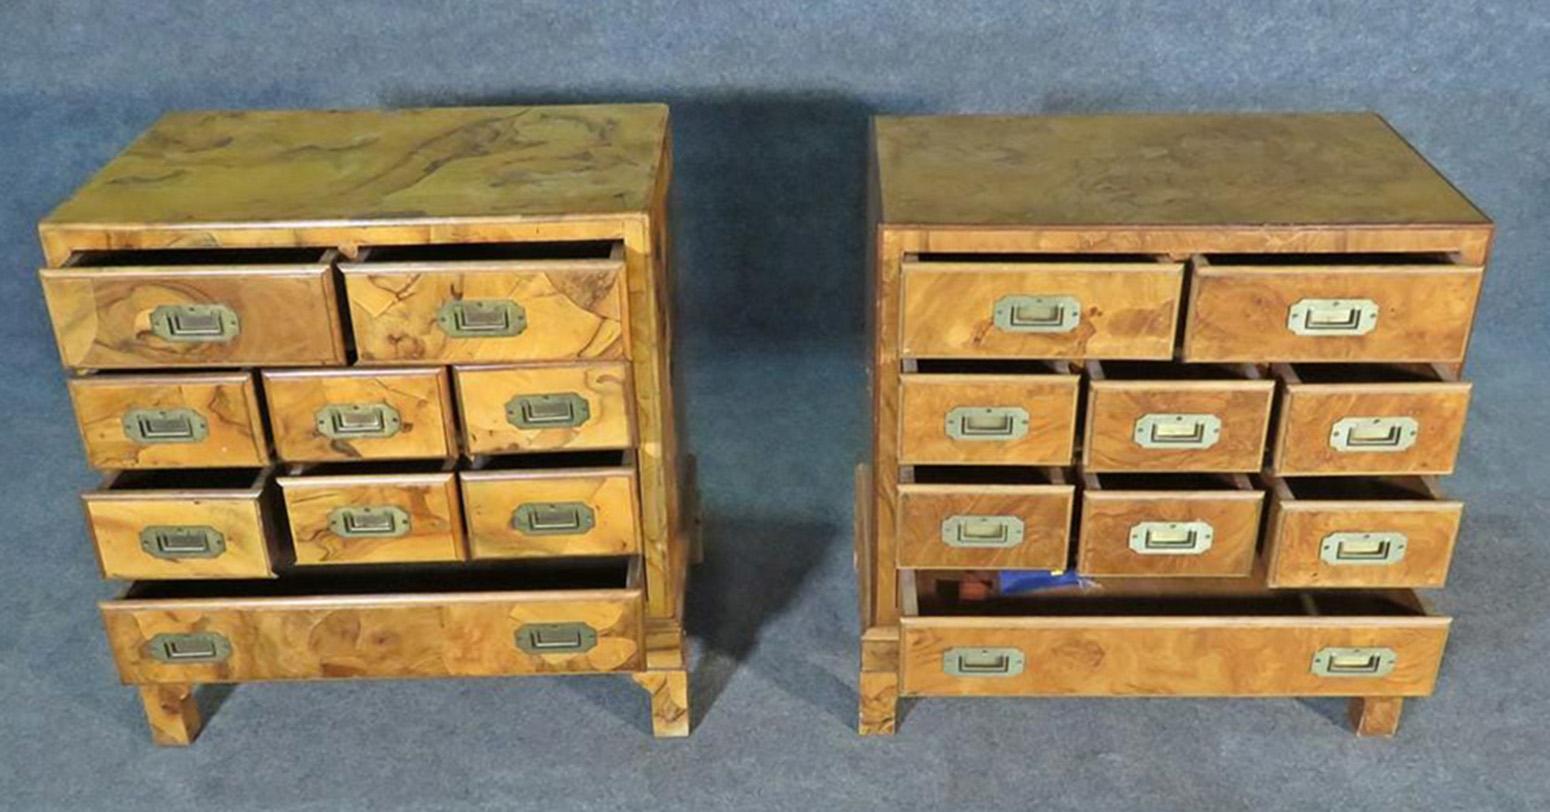 These are almost identical, except dimensions are slightly different. You may never notice when they're spaced apart in the room. The chests are made of burled walnut and date to the 1960s. They measure 26 1/2